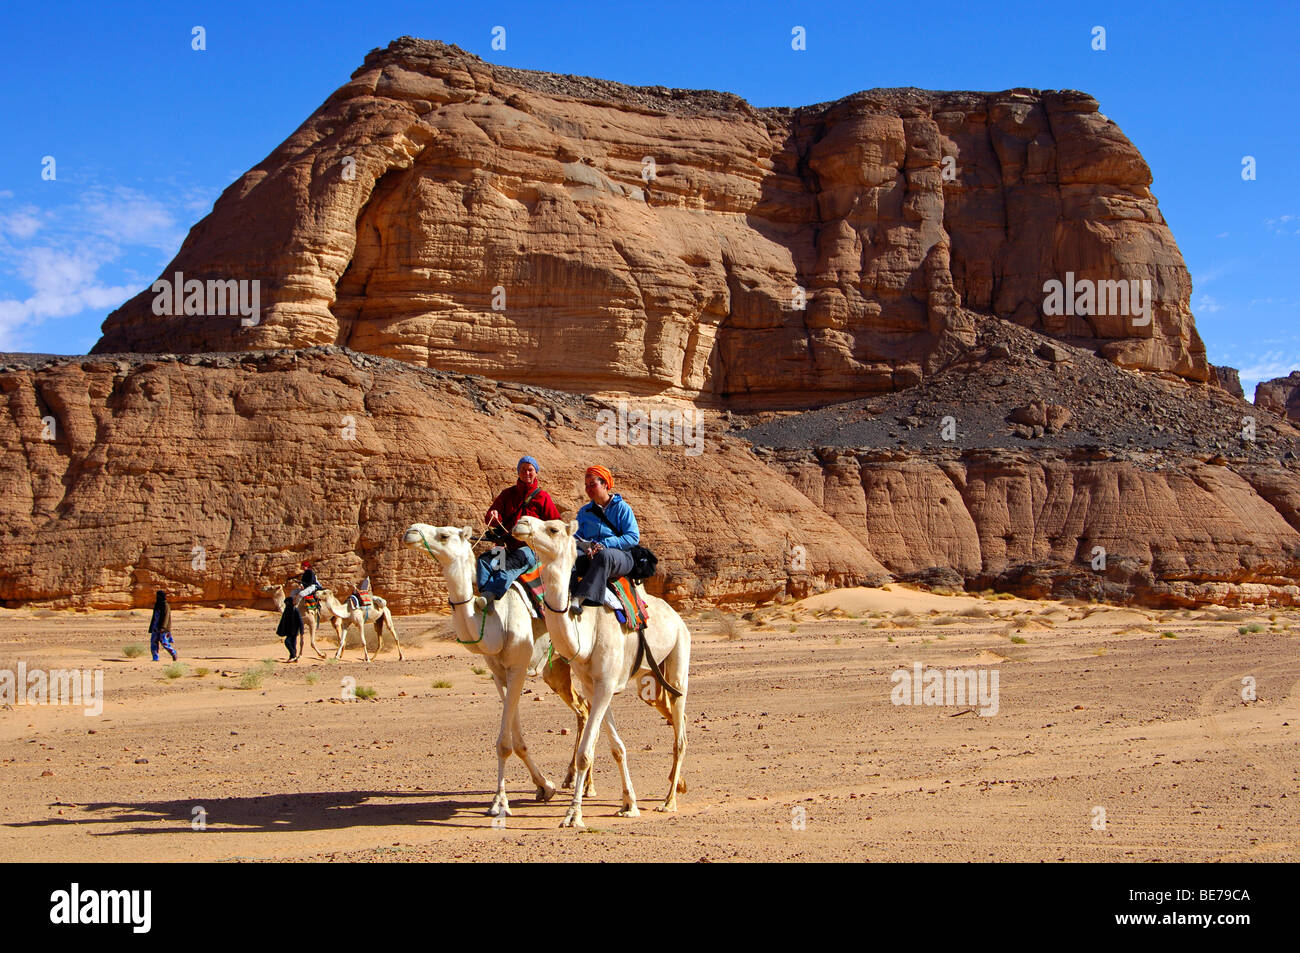 Tourists riding camels in the wadis of the Acacus mountains, Libya Stock Photo